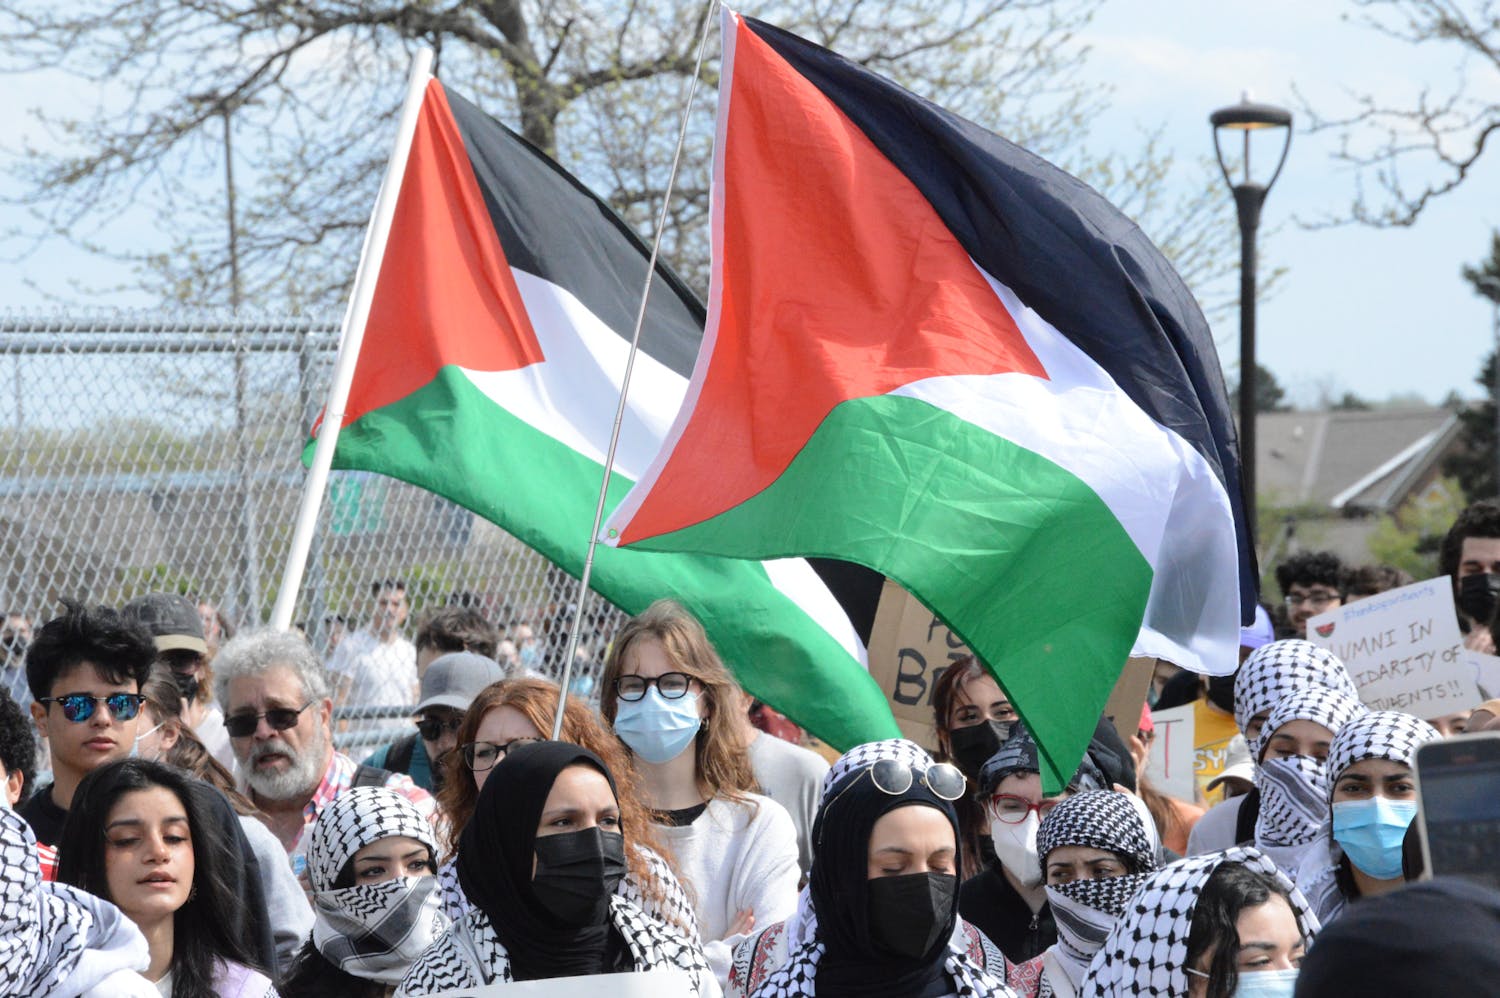 Protestors carried Palestinian flags at Friday's on-campus demonstration.